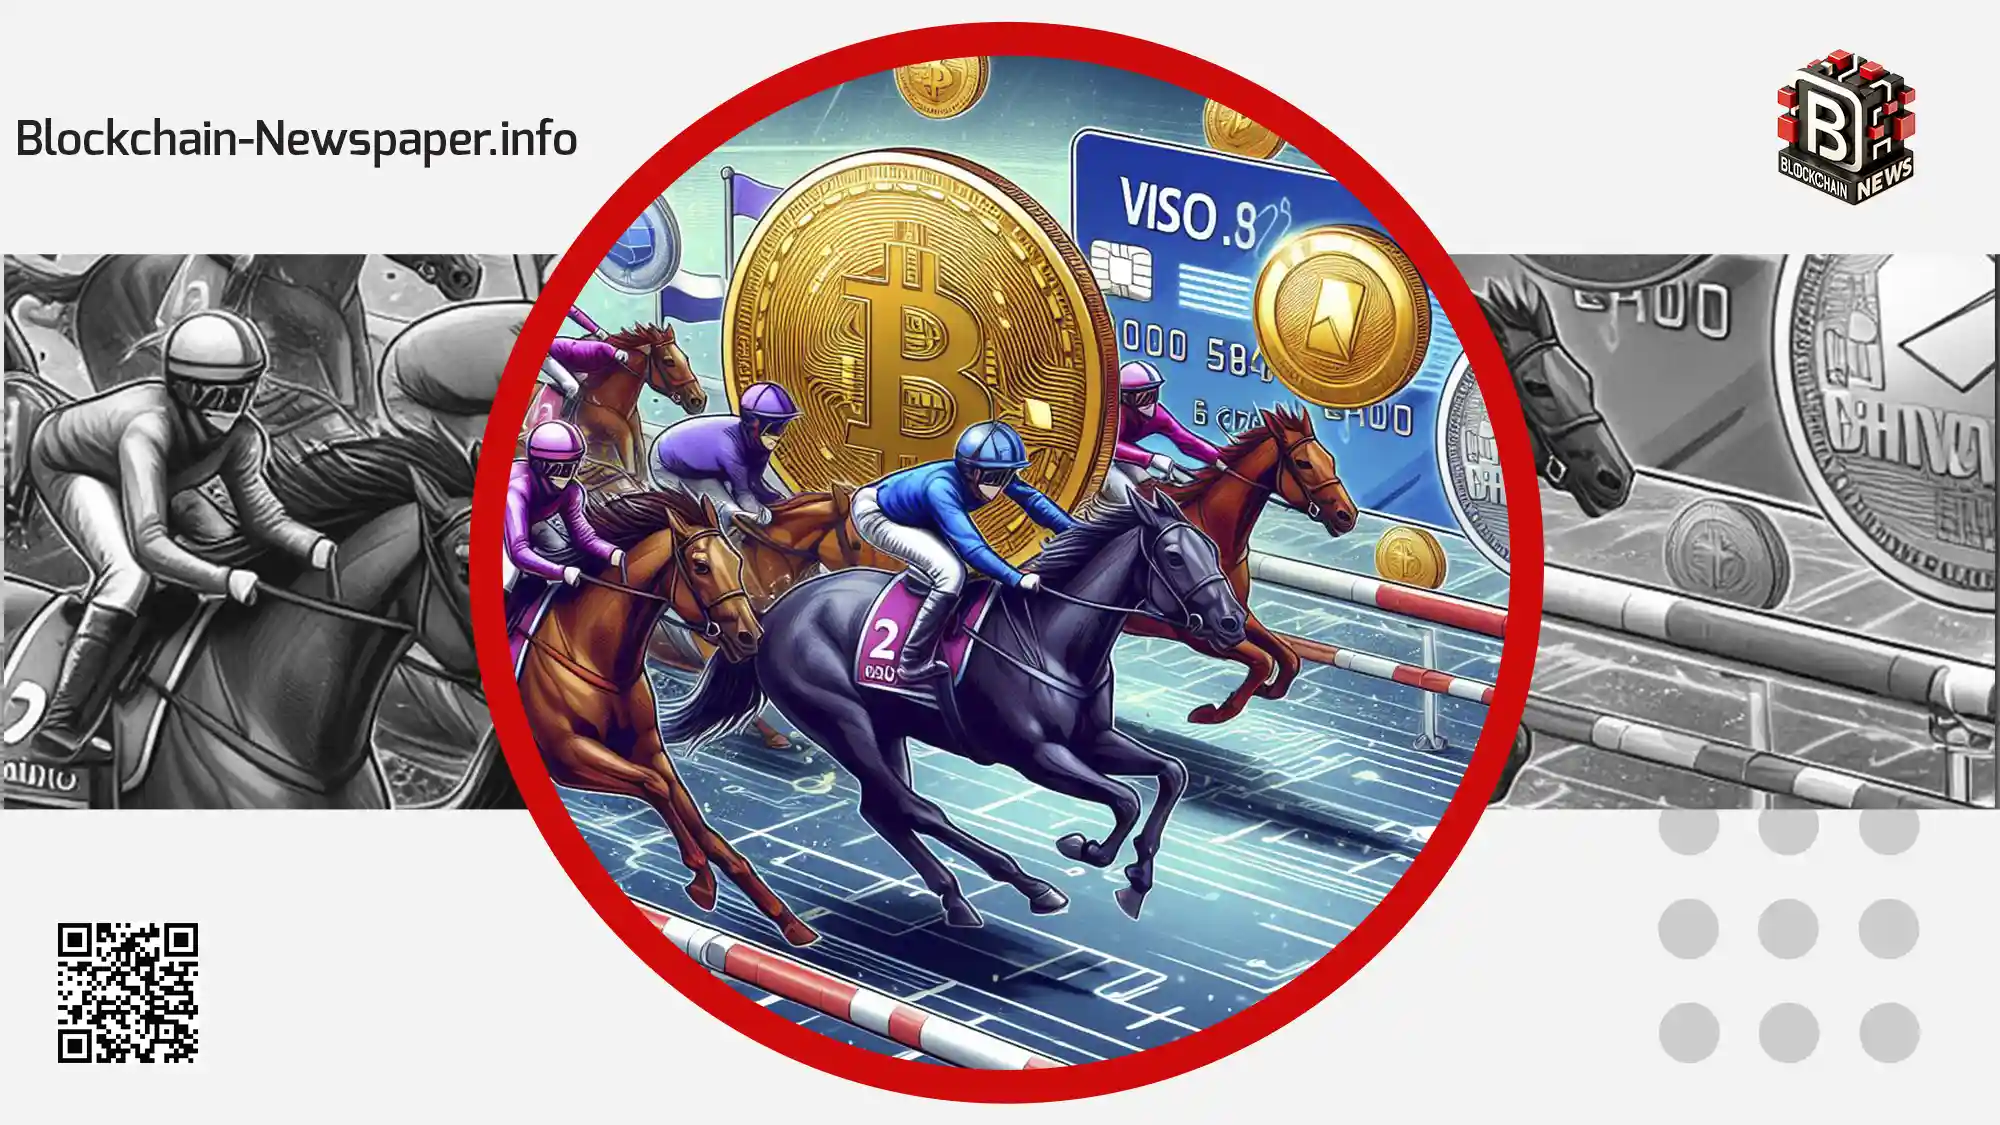 Stablecoin-and-Visa-competition